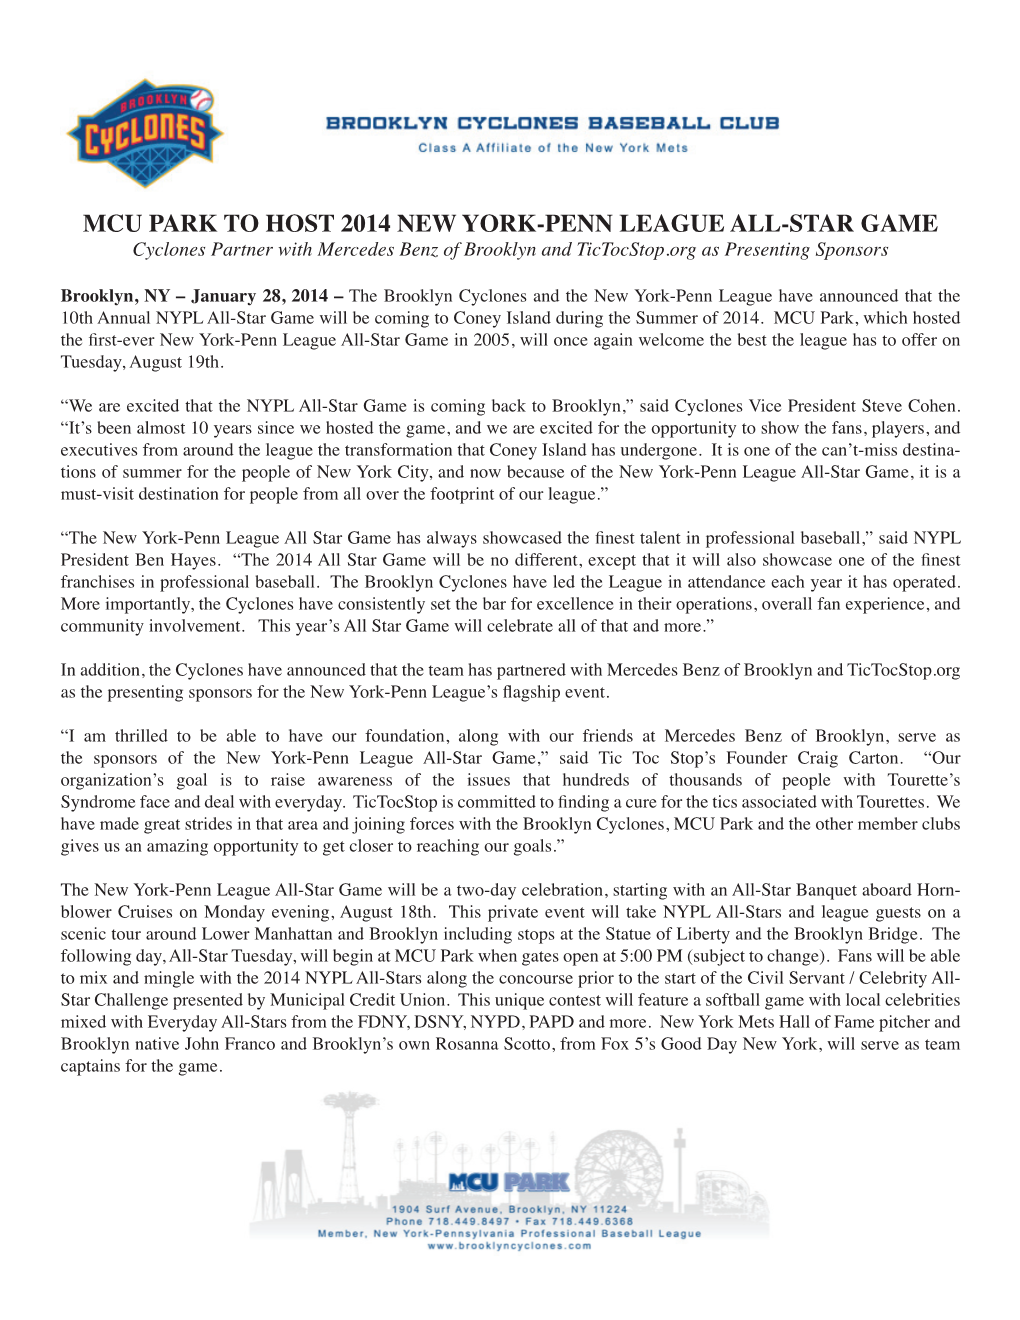 MCU PARK to HOST 2014 NEW YORK-PENN LEAGUE ALL-STAR GAME Cyclones Partner with Mercedes Benz of Brooklyn and Tictocstop.Org As Presenting Sponsors